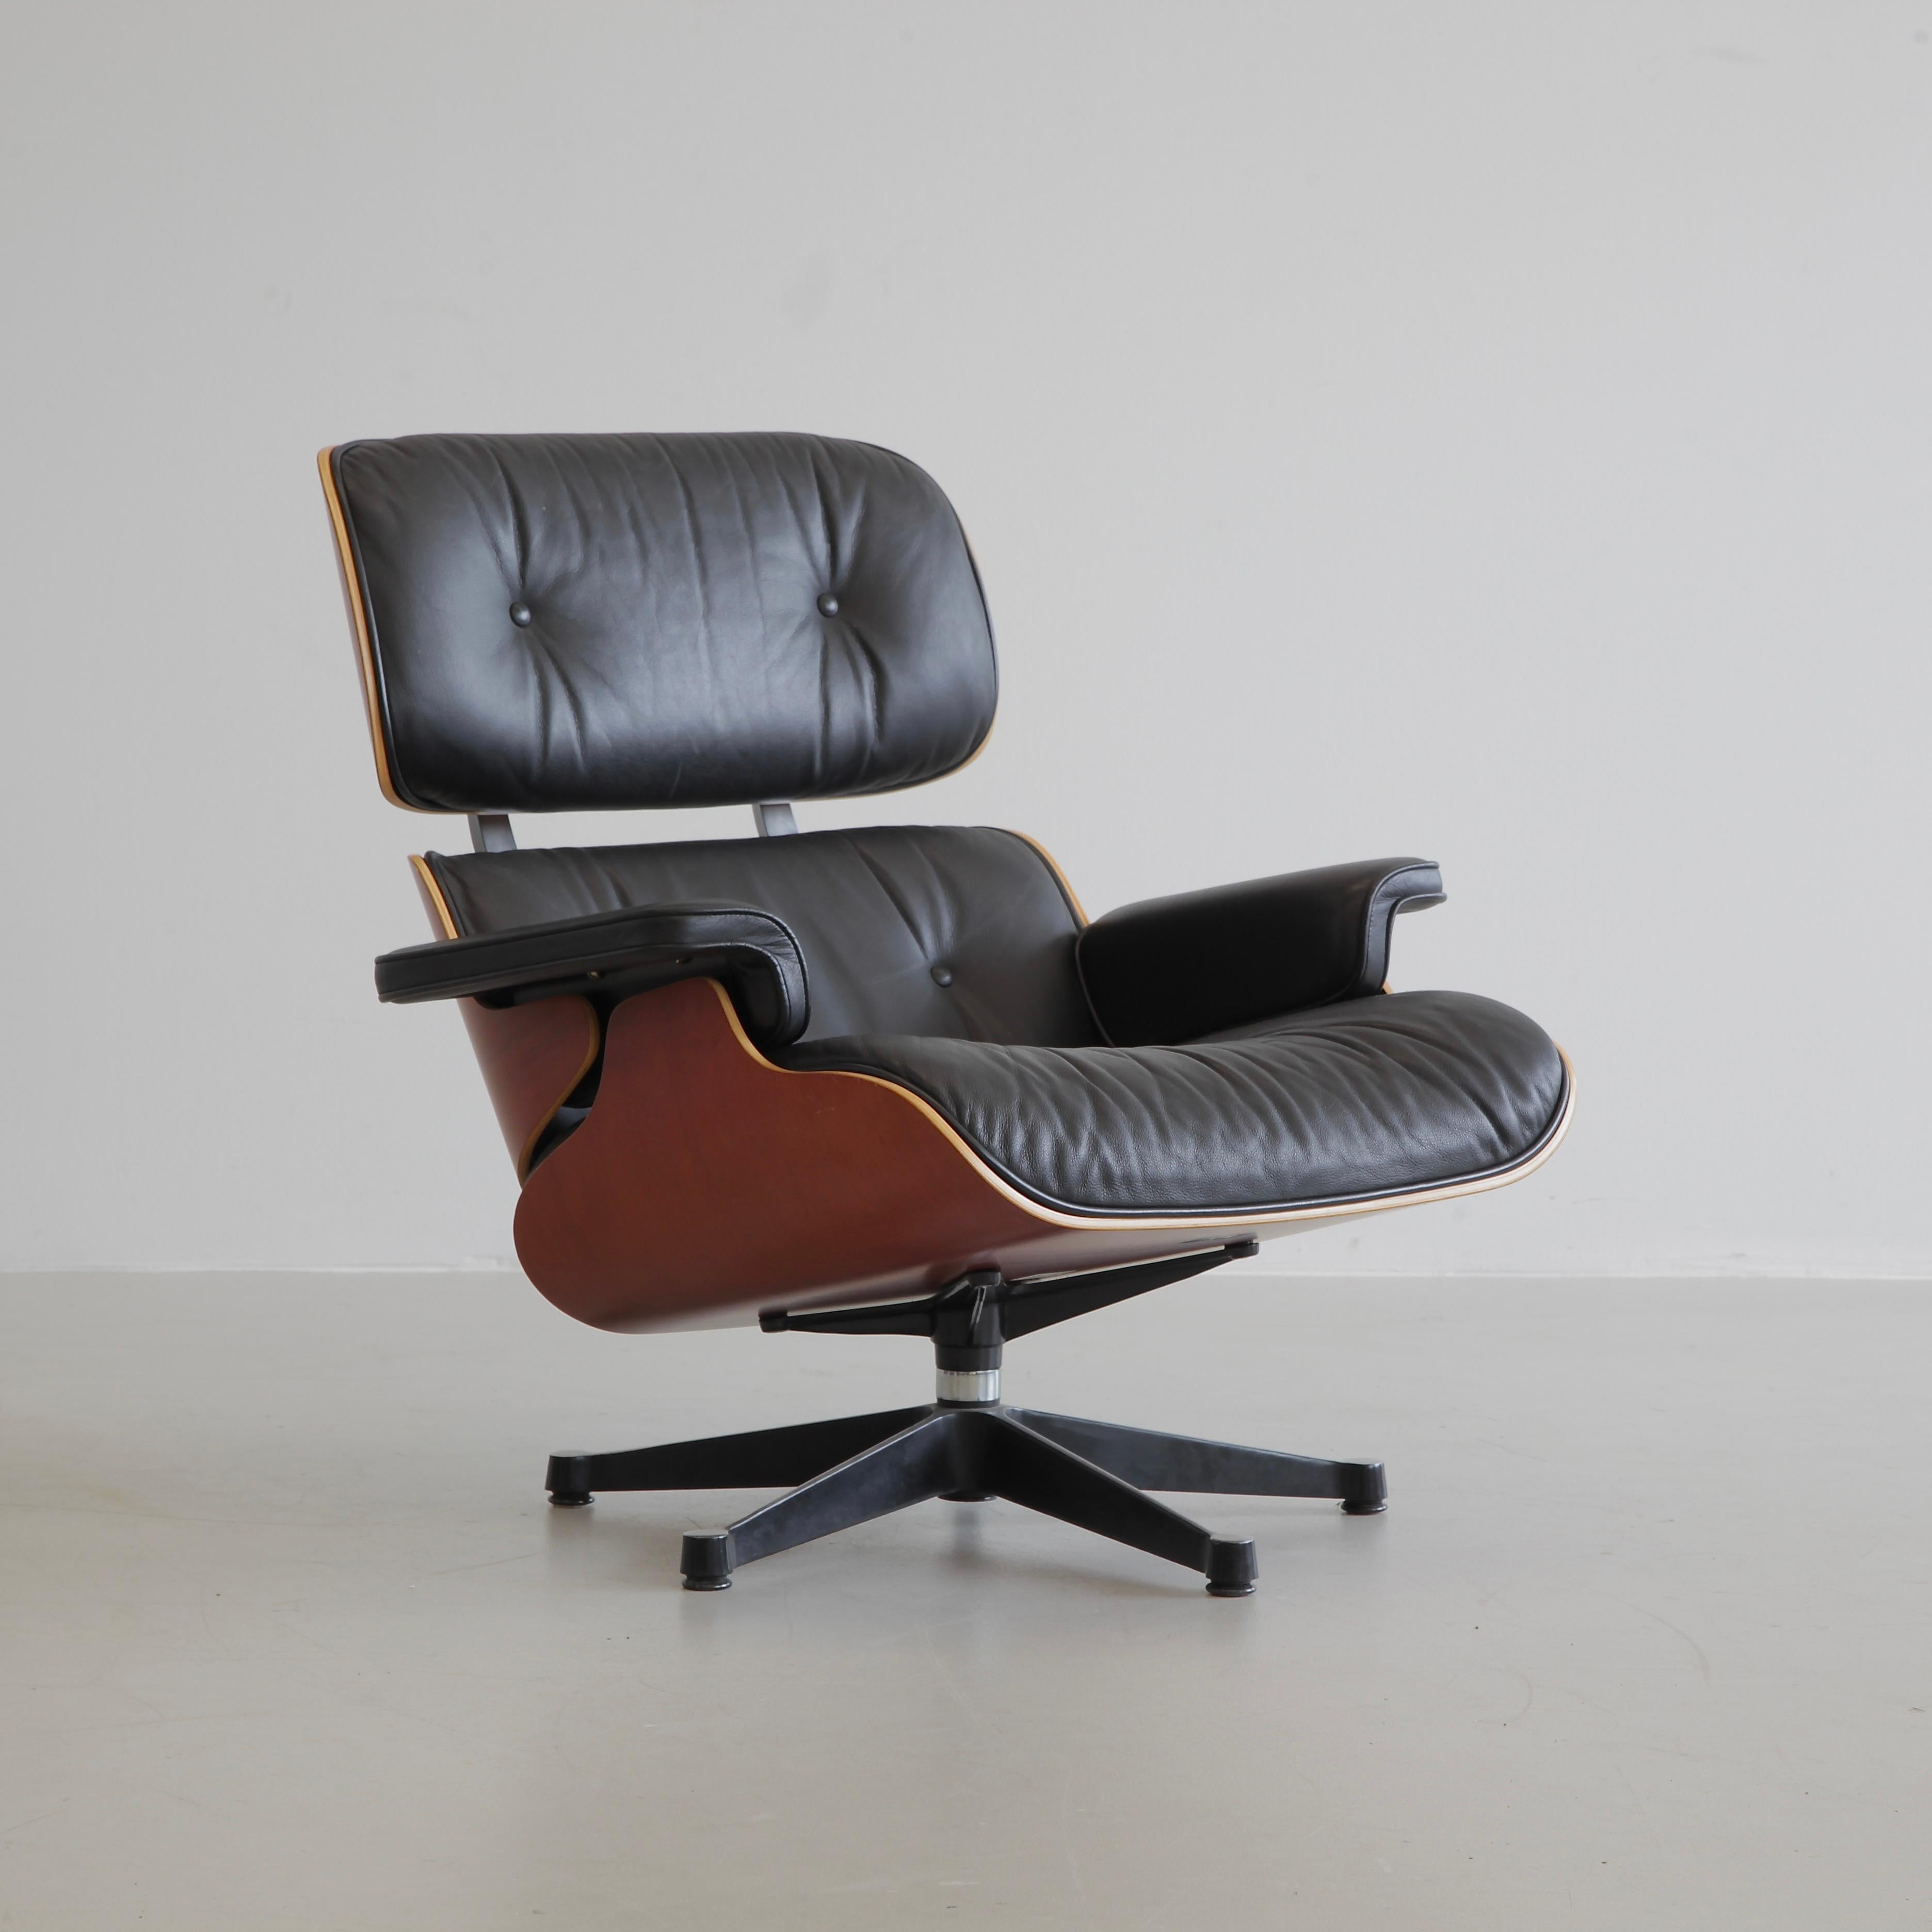 German Charles & Ray Eames Lounge Chair and Footstool, Vitra 1999